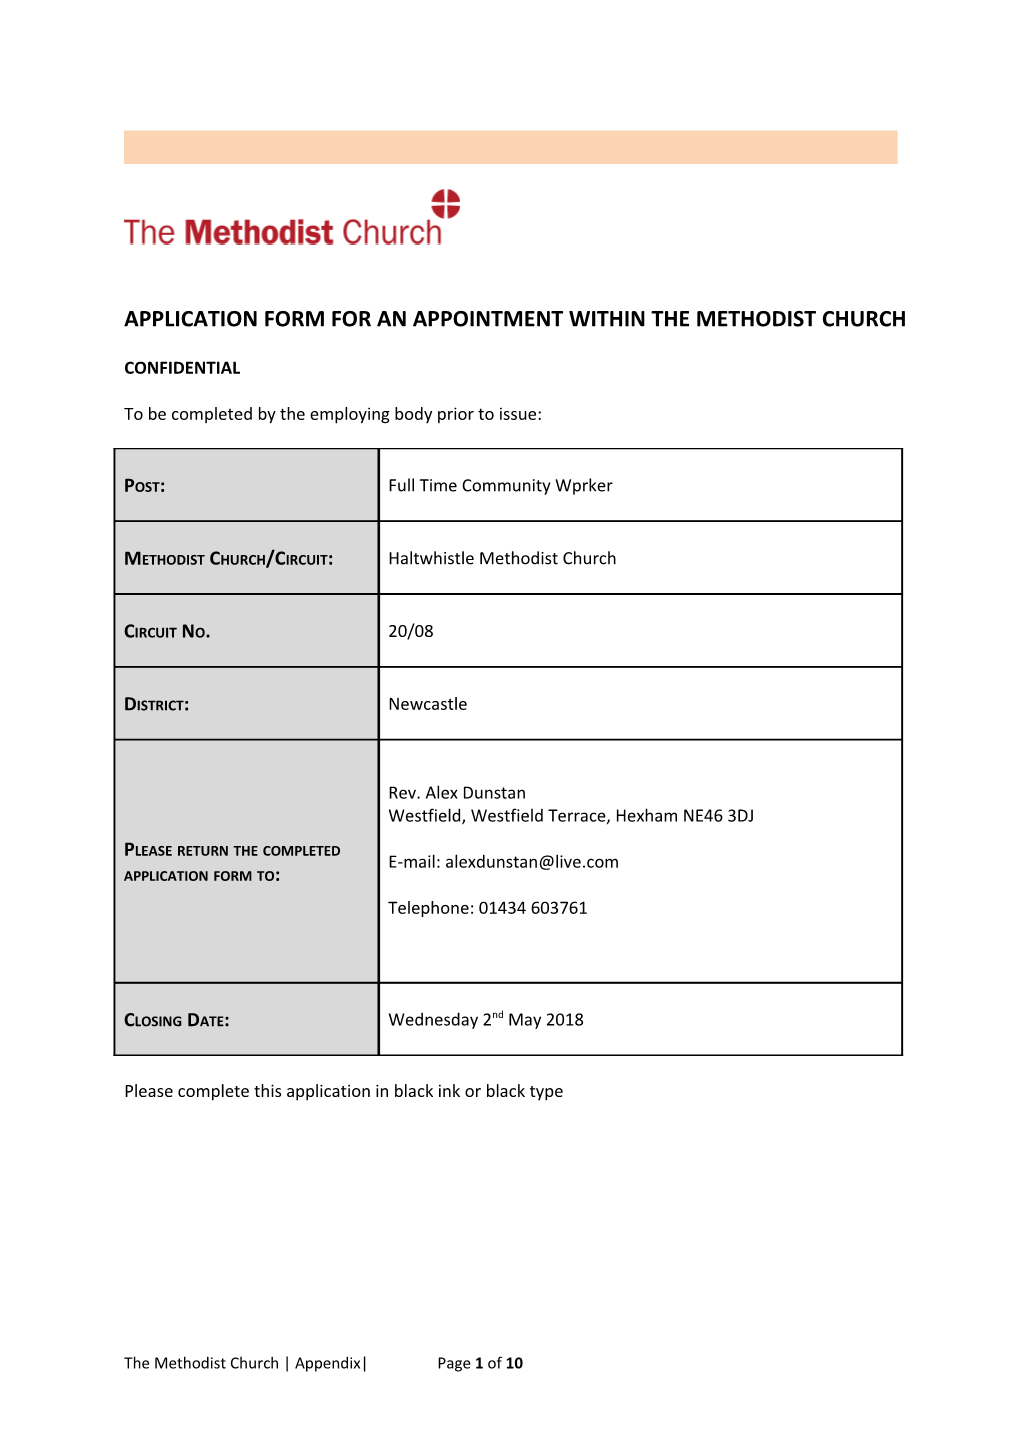 Application Form for an Appointment Within the Methodist Church